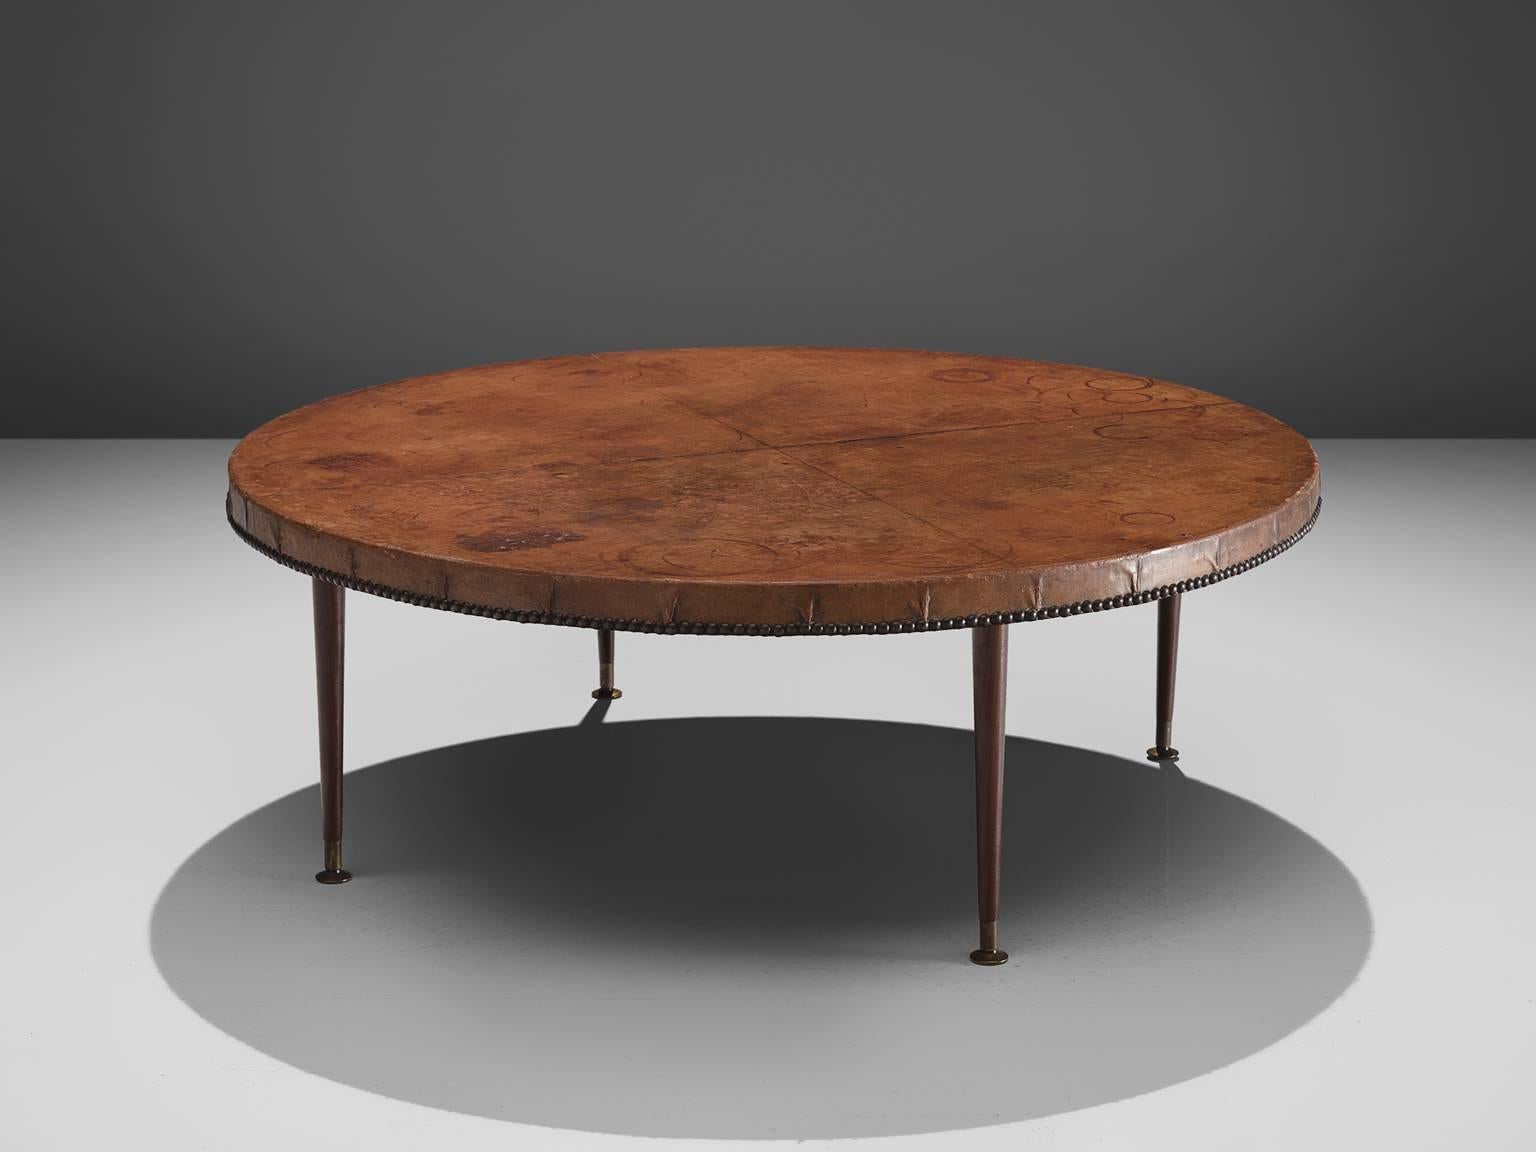 Otto Schulz for Boët, cocktail table, cognac niger leather and hardwood, Sweden, circa 1935.

This side table is designed by Otto Schulz for Boet, a company that Schultz founded himself. The table is executed with brass nails on the sides and the